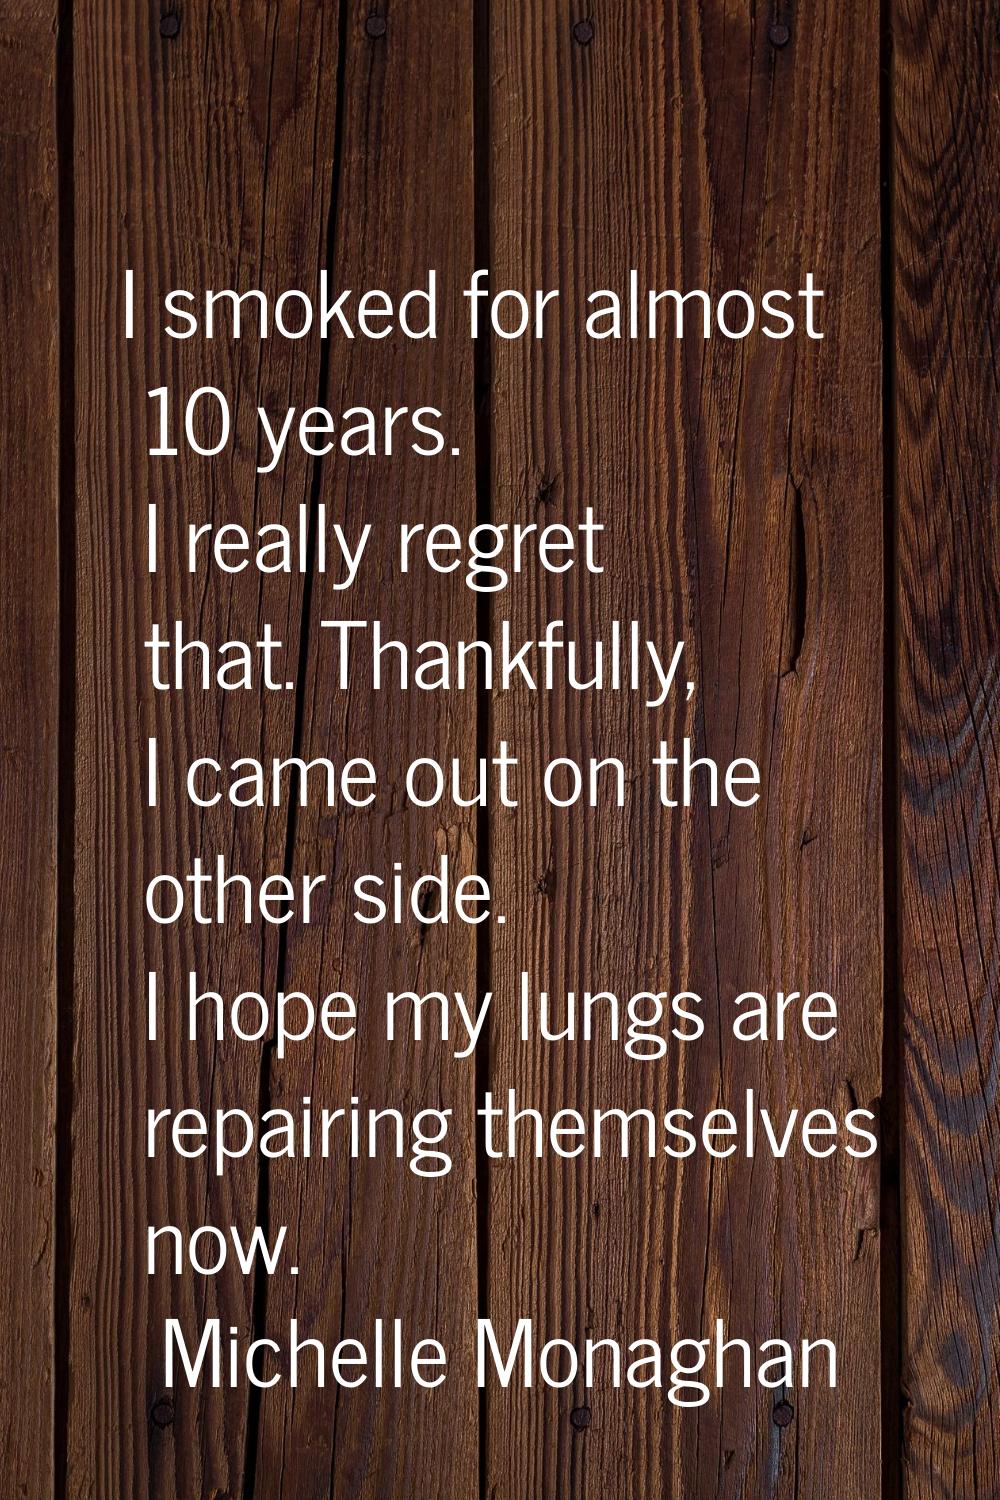 I smoked for almost 10 years. I really regret that. Thankfully, I came out on the other side. I hop